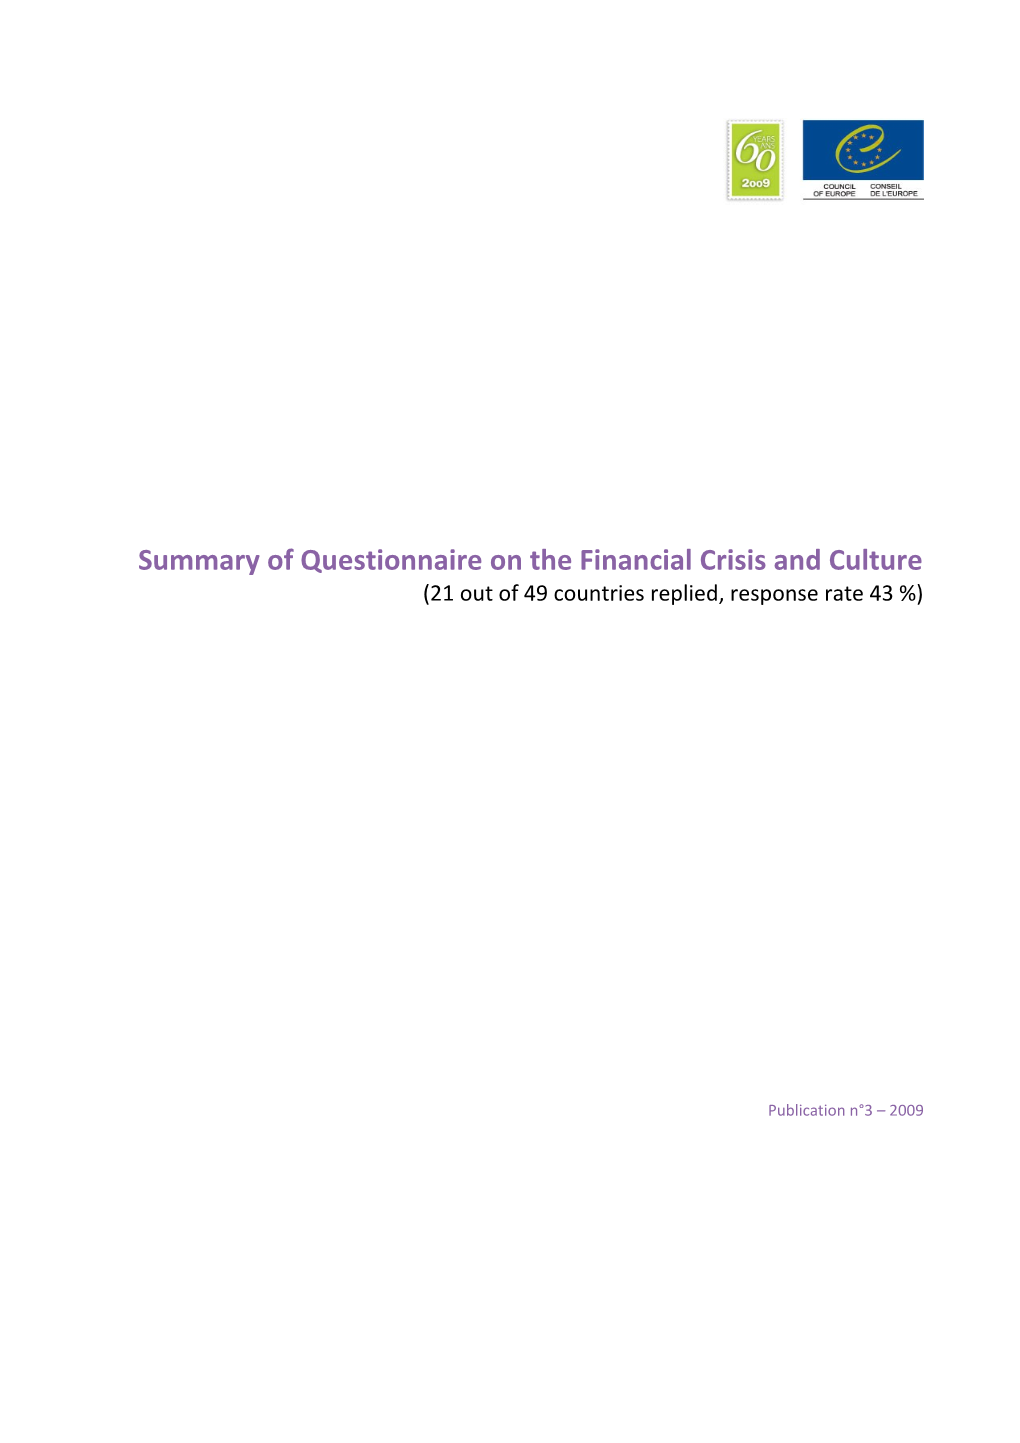 Summary of Questionnaire on the Financial Crisis and Culture